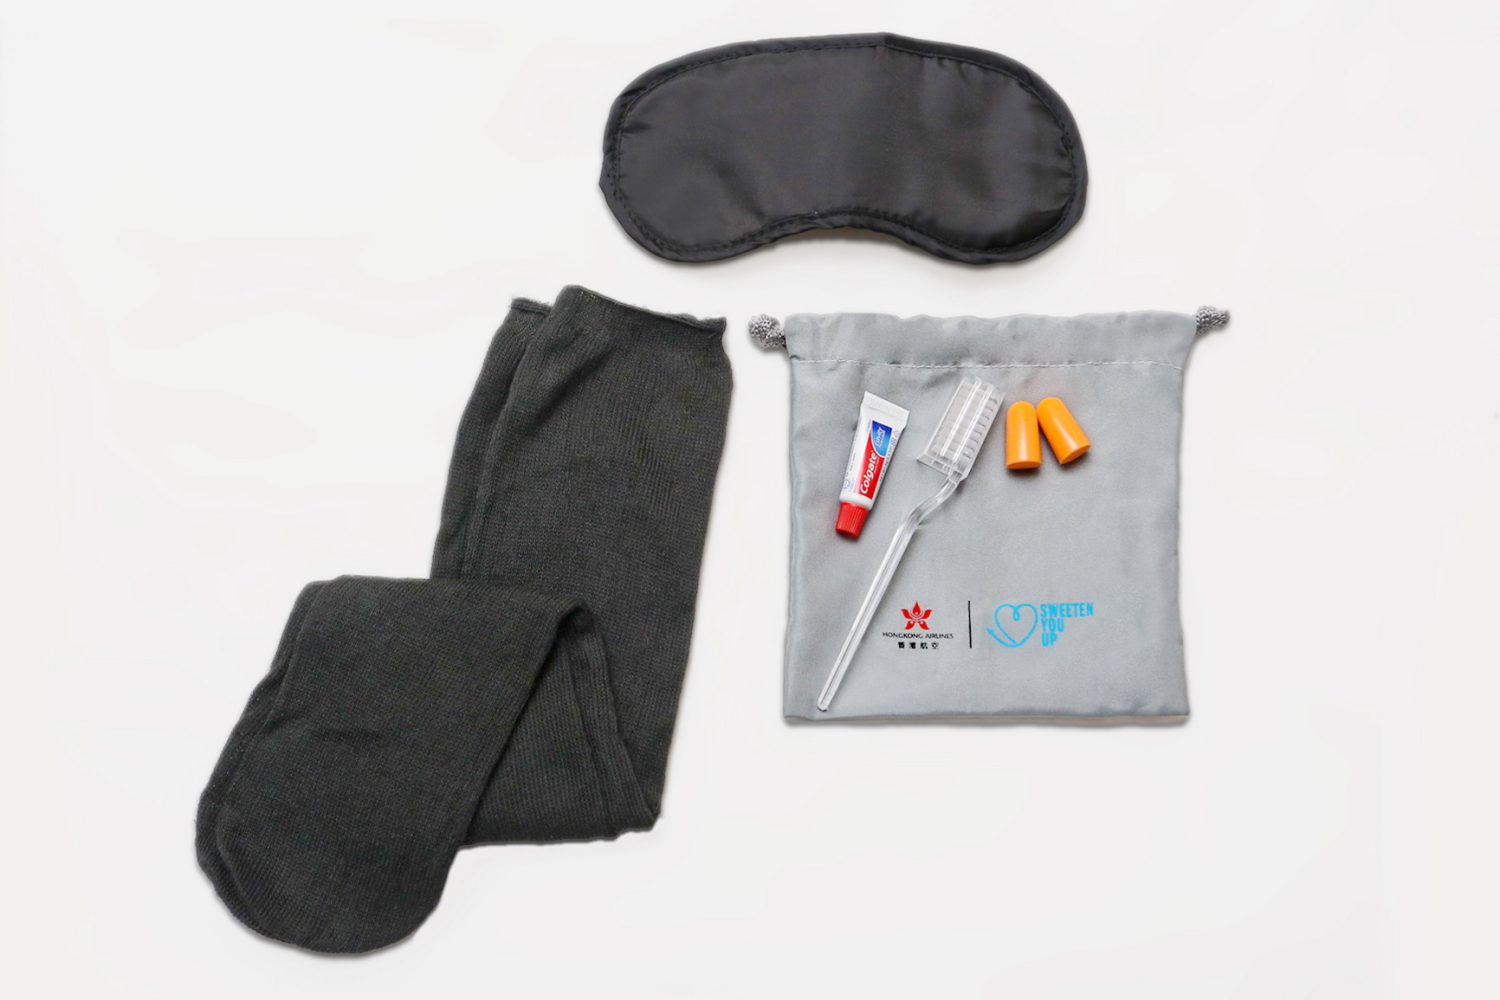 Hong Kong Airlines' new Economy Class Amenity Kit